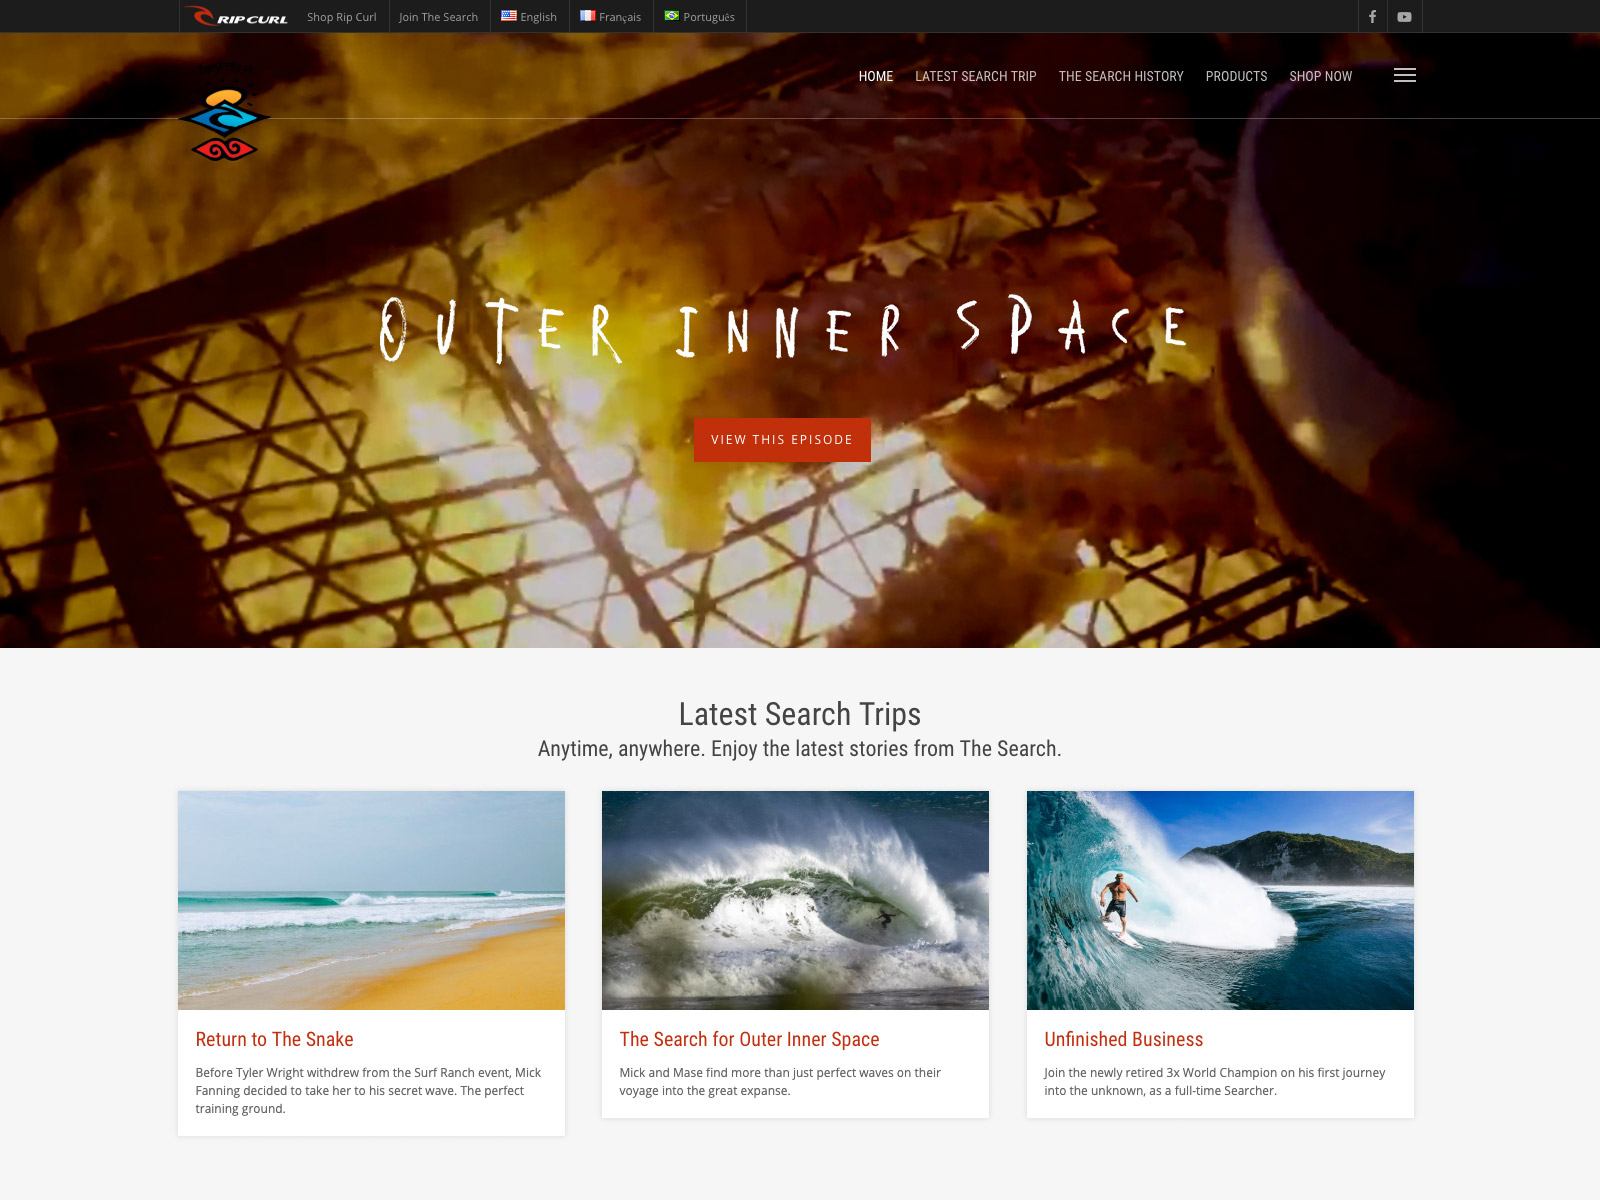 The Search, a stellar digital experience for Rip Curl customers